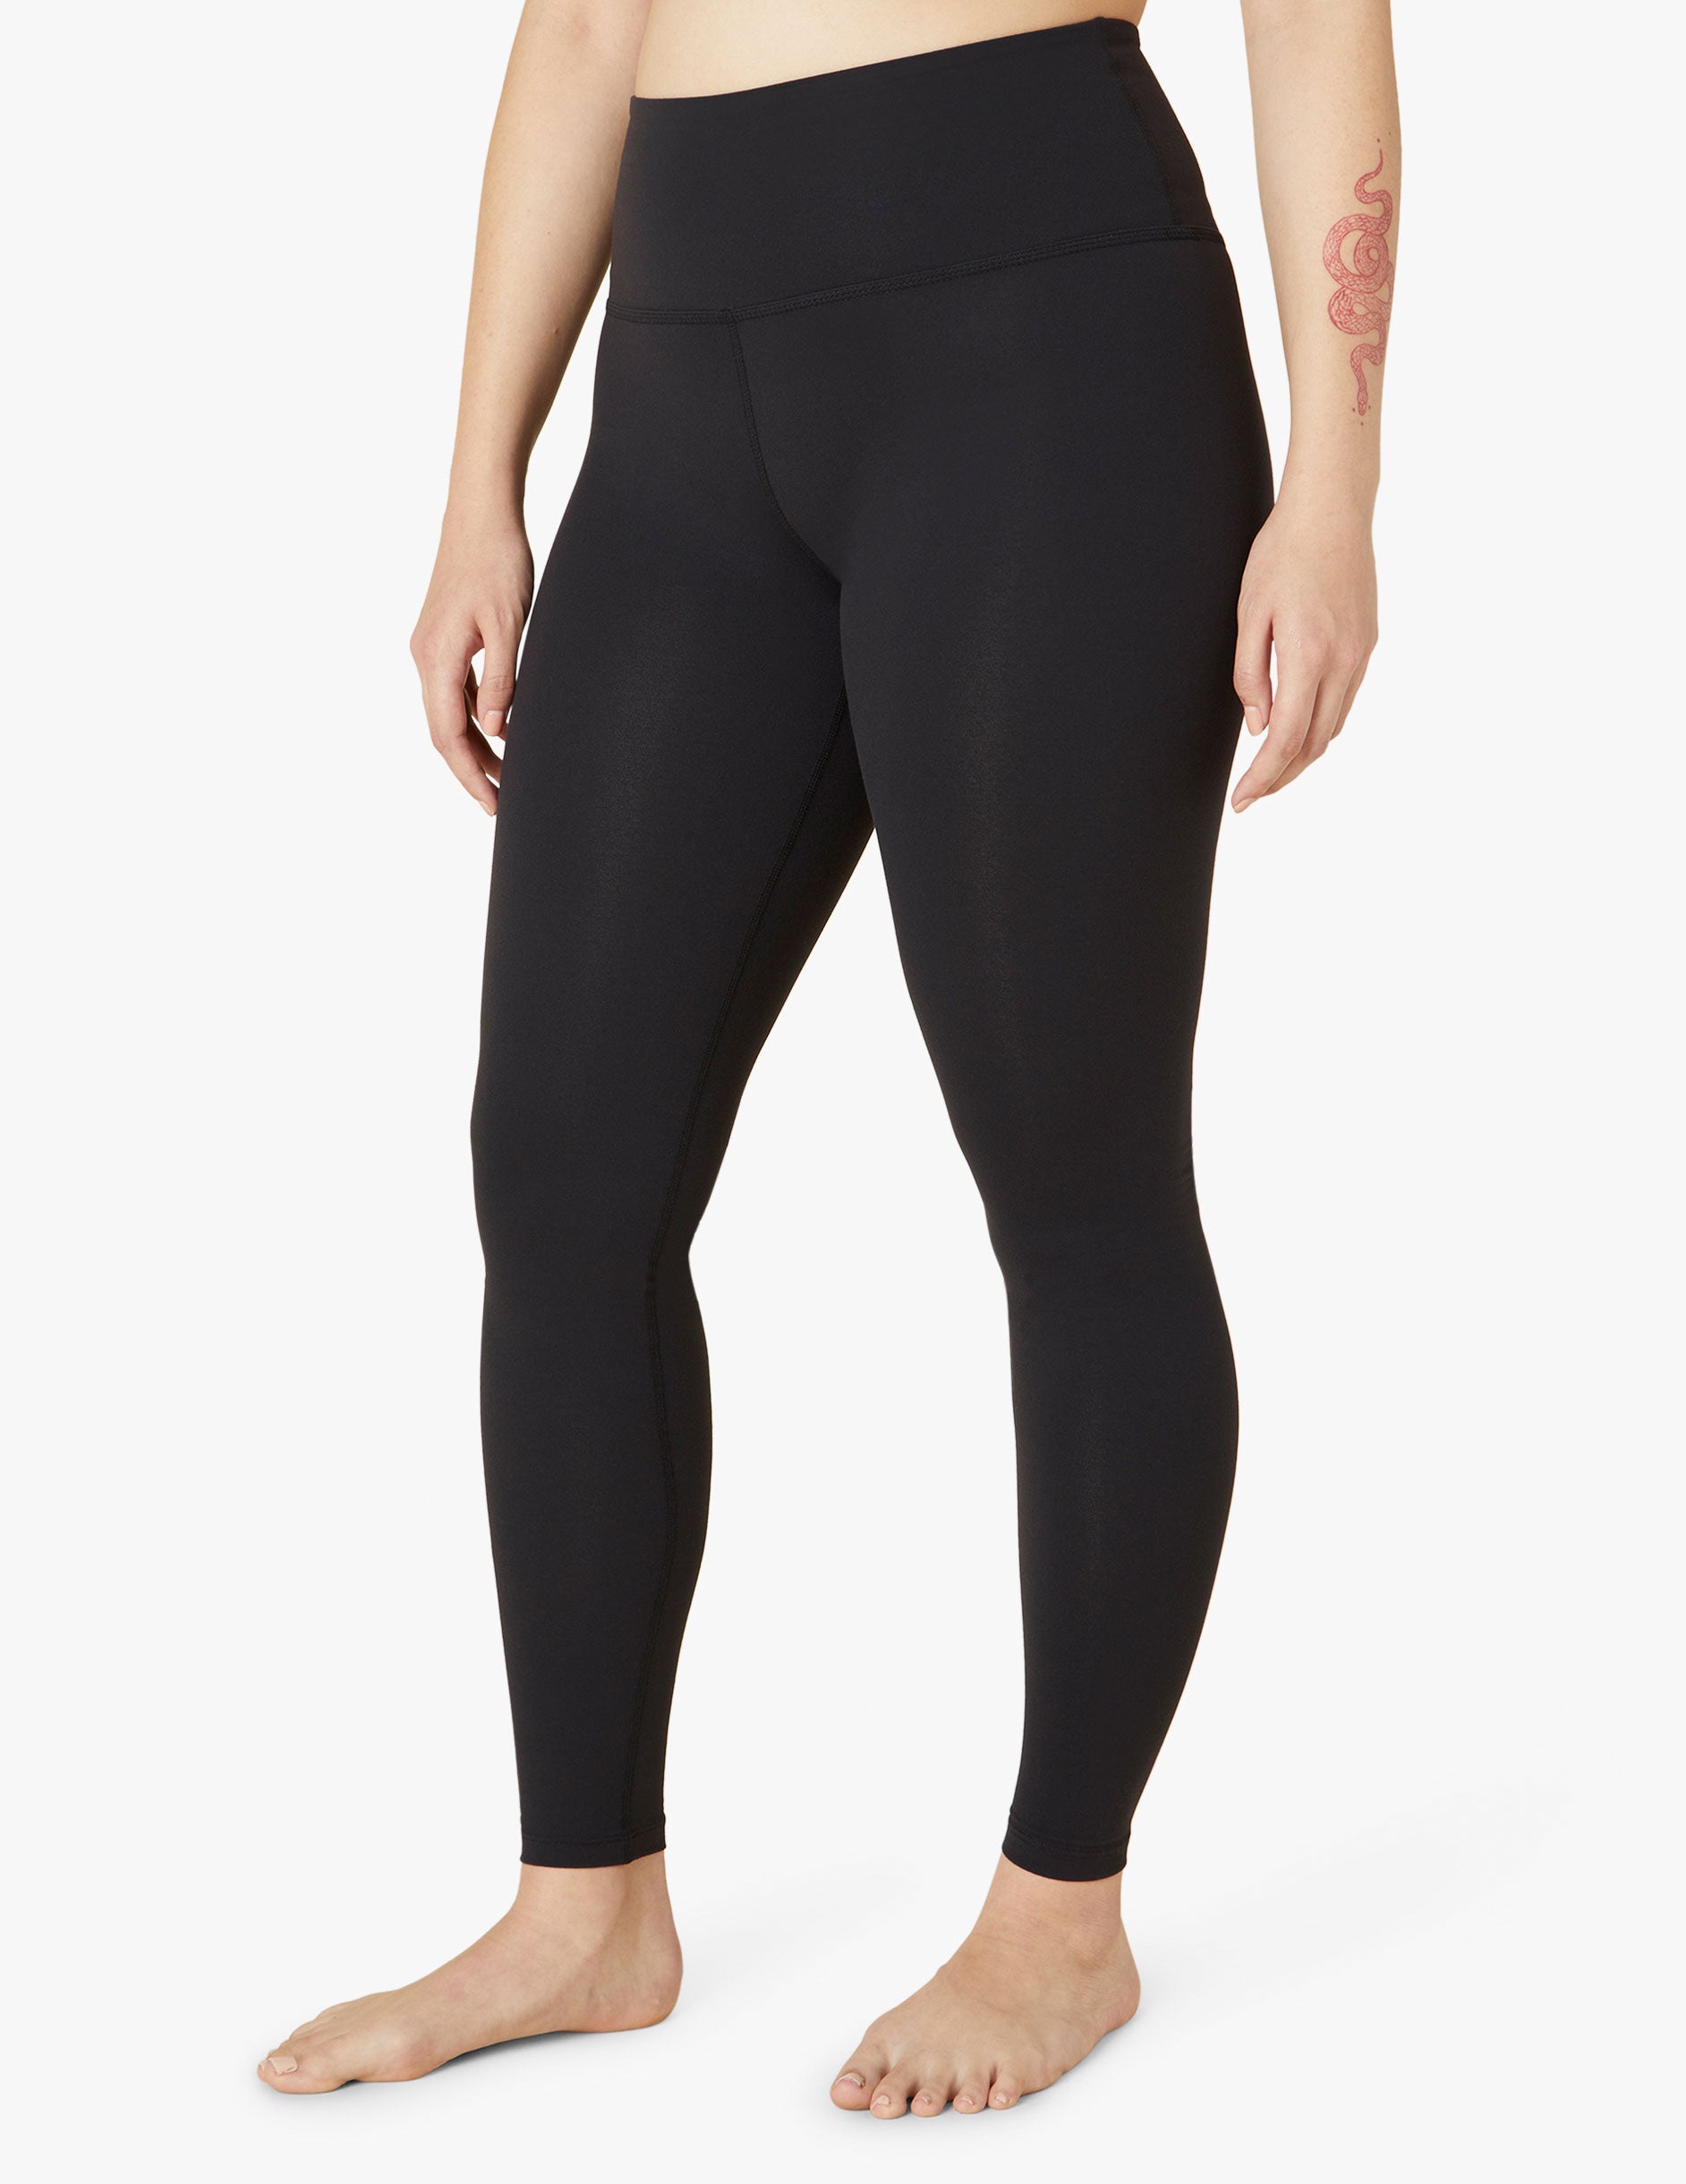 Beyond Athletica - Apex Legging In Barely There - Bronzed Black